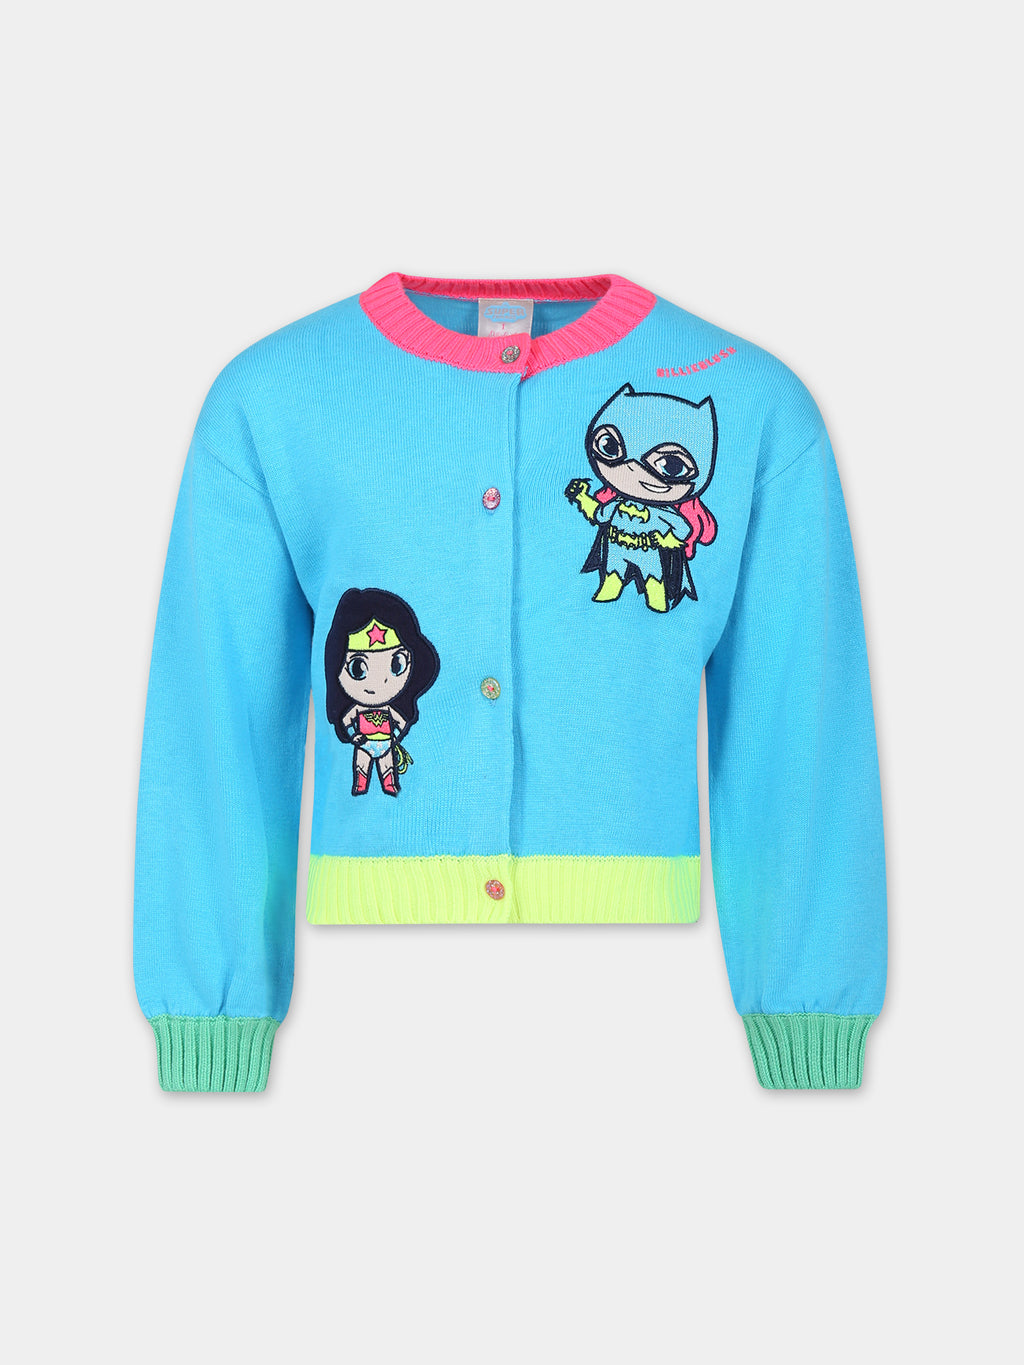 Light blue cardigan for girl with Wonder Woman and Batgirl